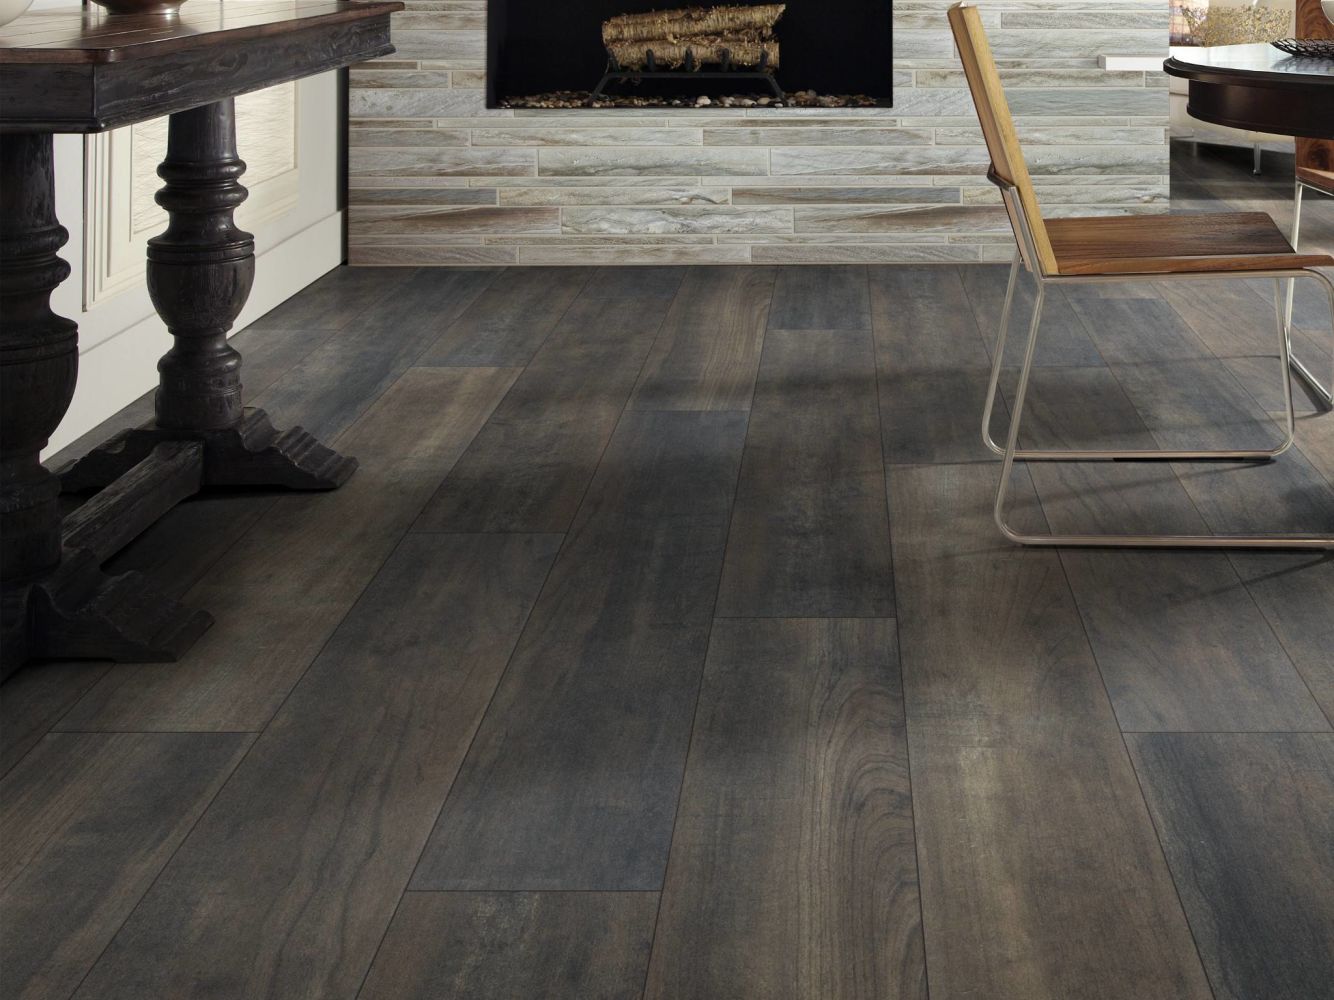 Shaw Floors Sumitomo Forestry Silverman Hilltop Mode Brown 07713_SL6SF